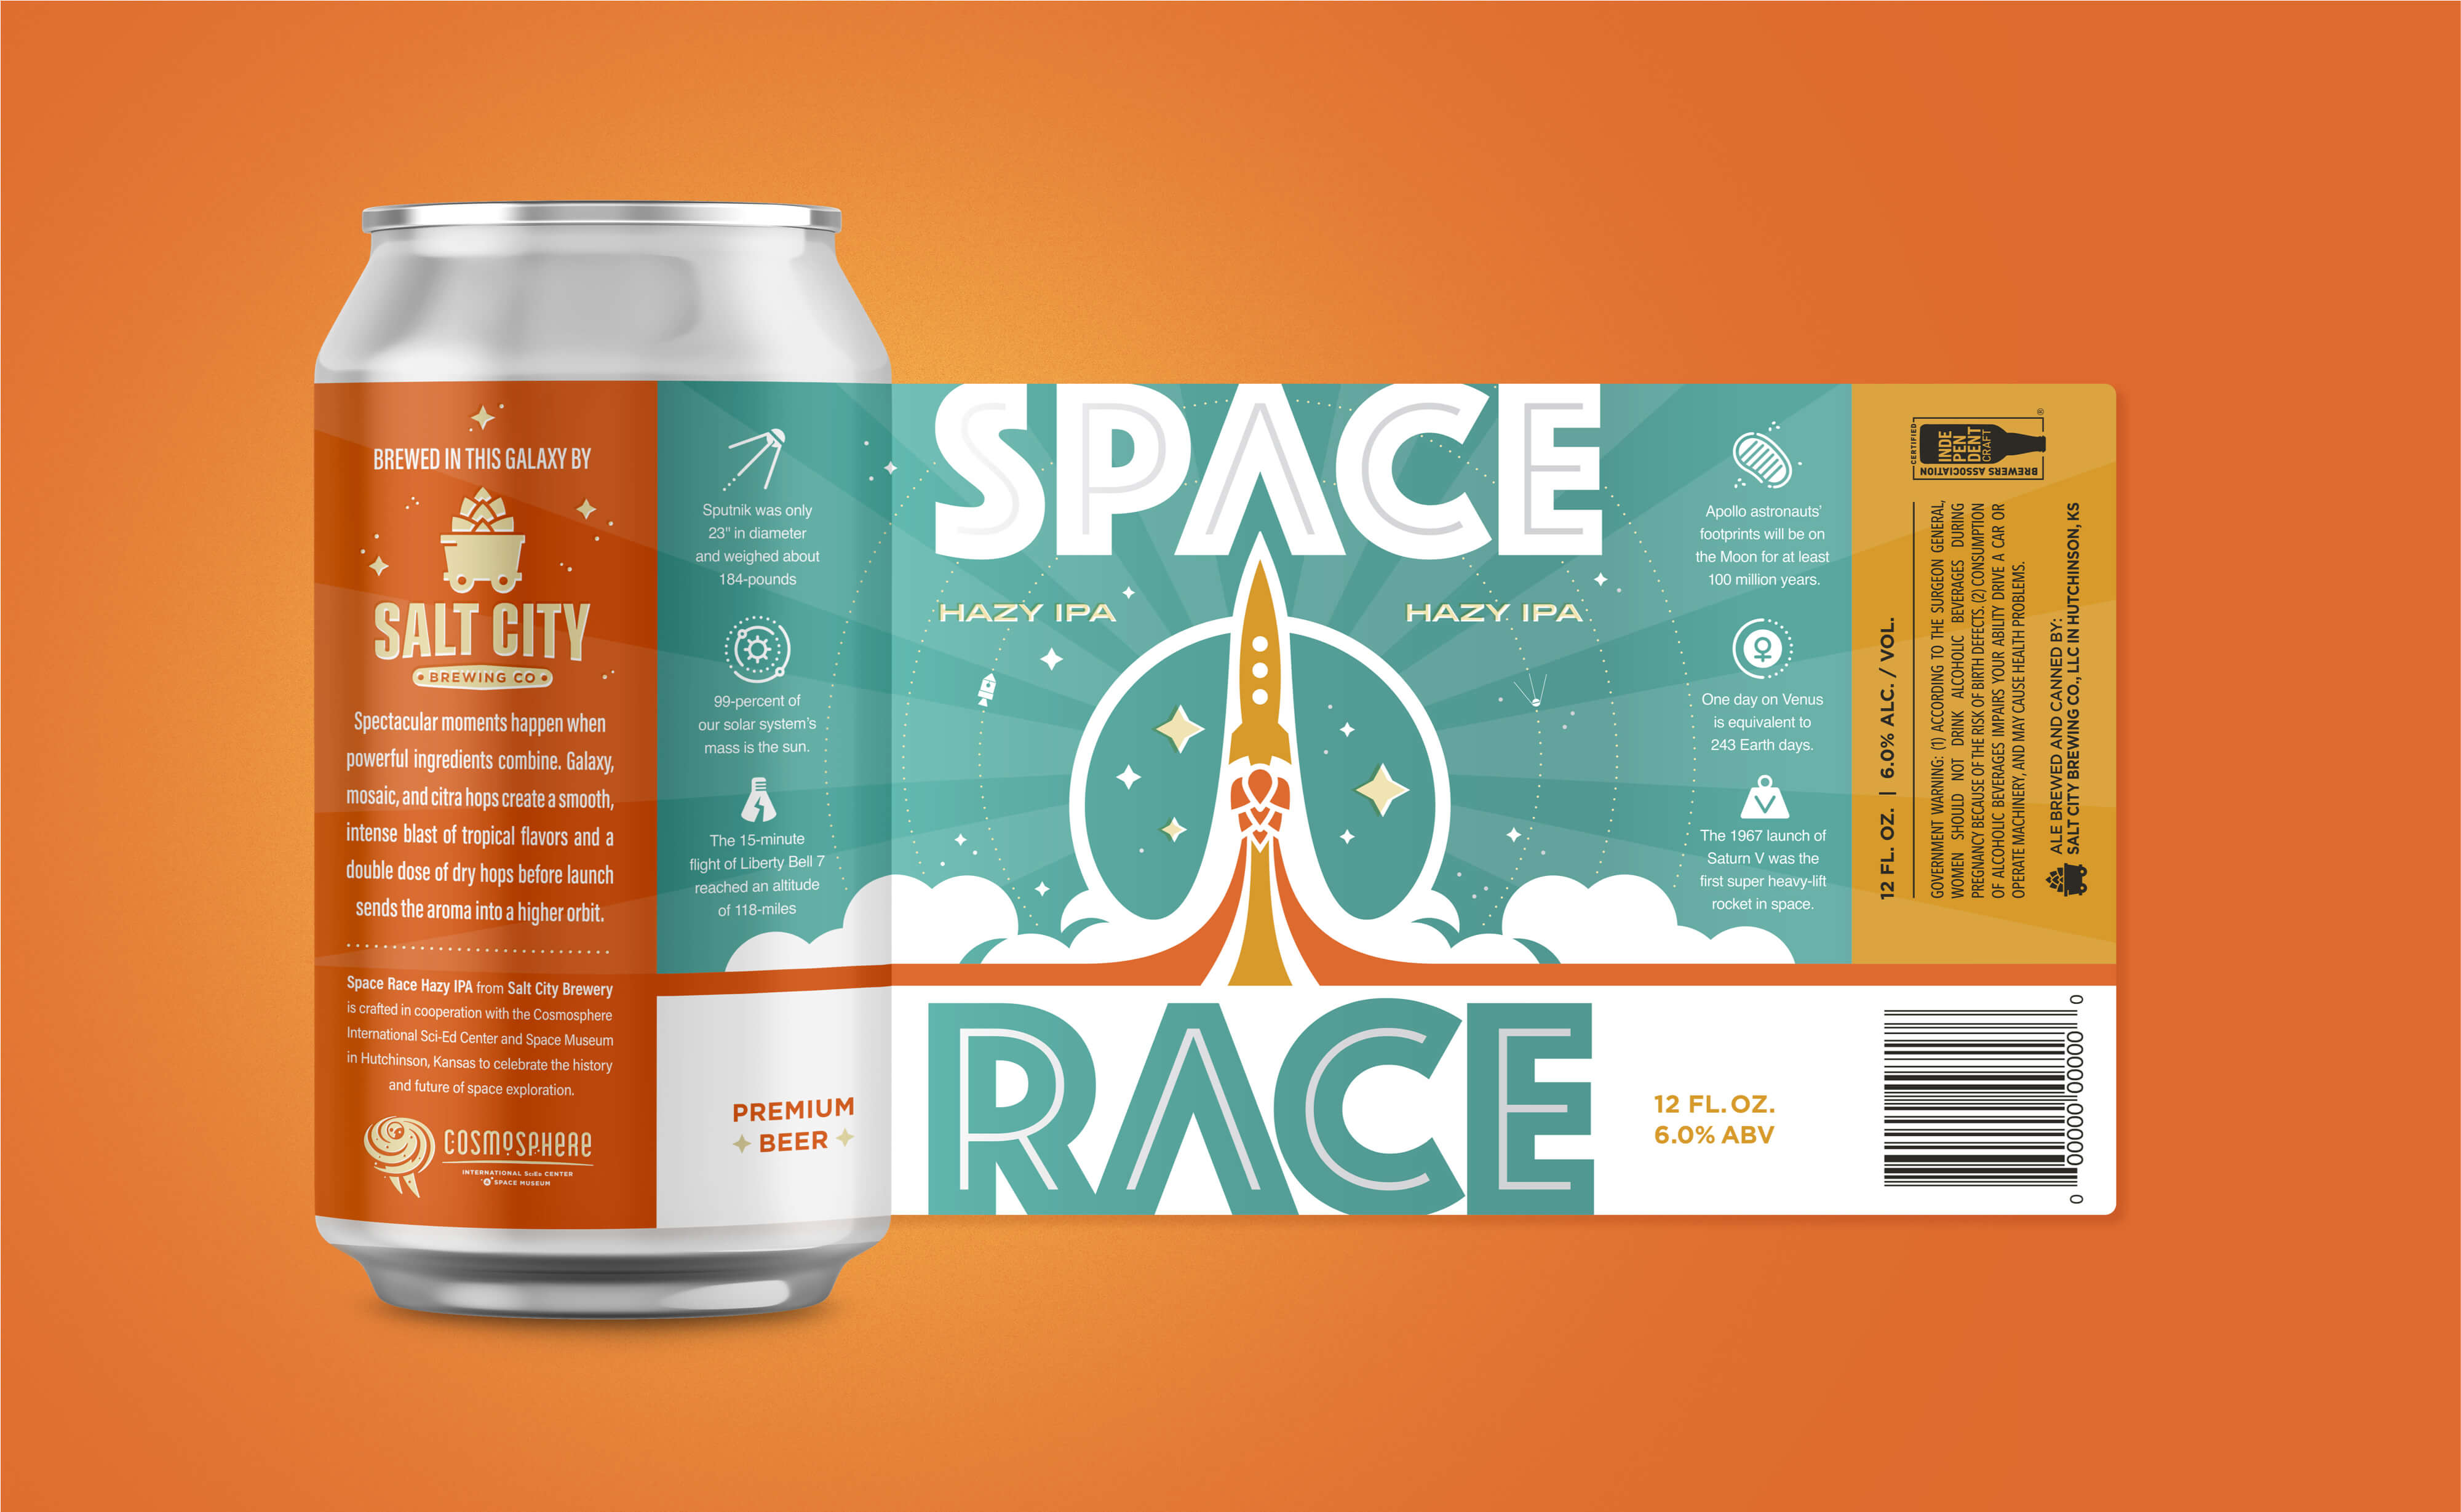 Space Race beer can label image